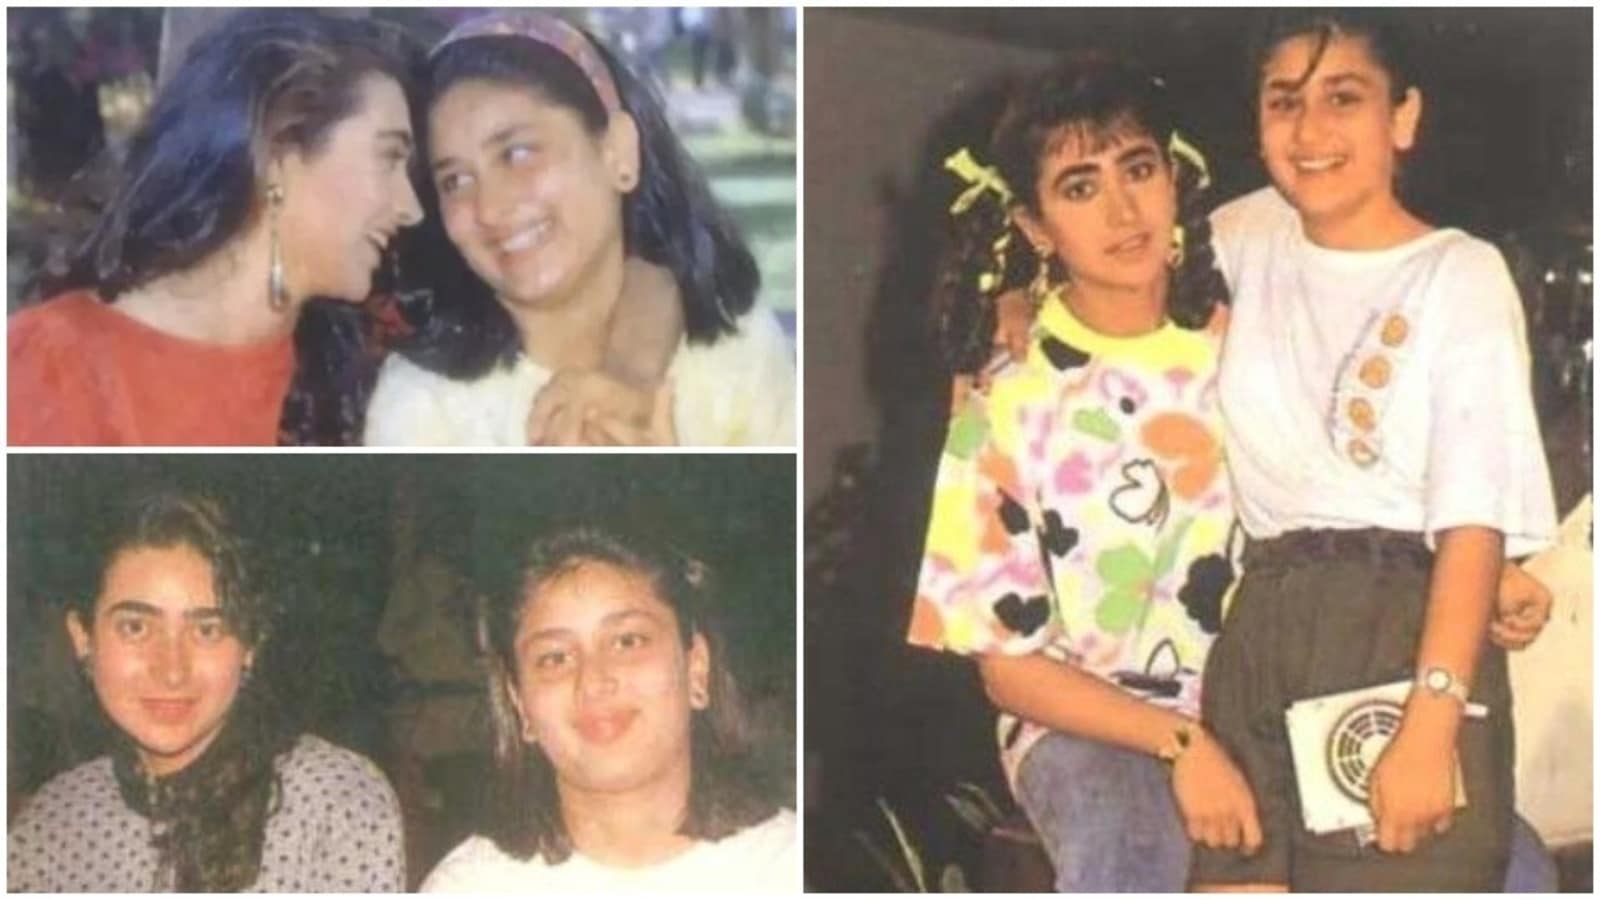 Baby Sister Crying Hd Videos - When Kareena Kapoor spoke about watching Karisma Kapoor cry in her days of  struggle: 'I've seen too much' | Bollywood - Hindustan Times